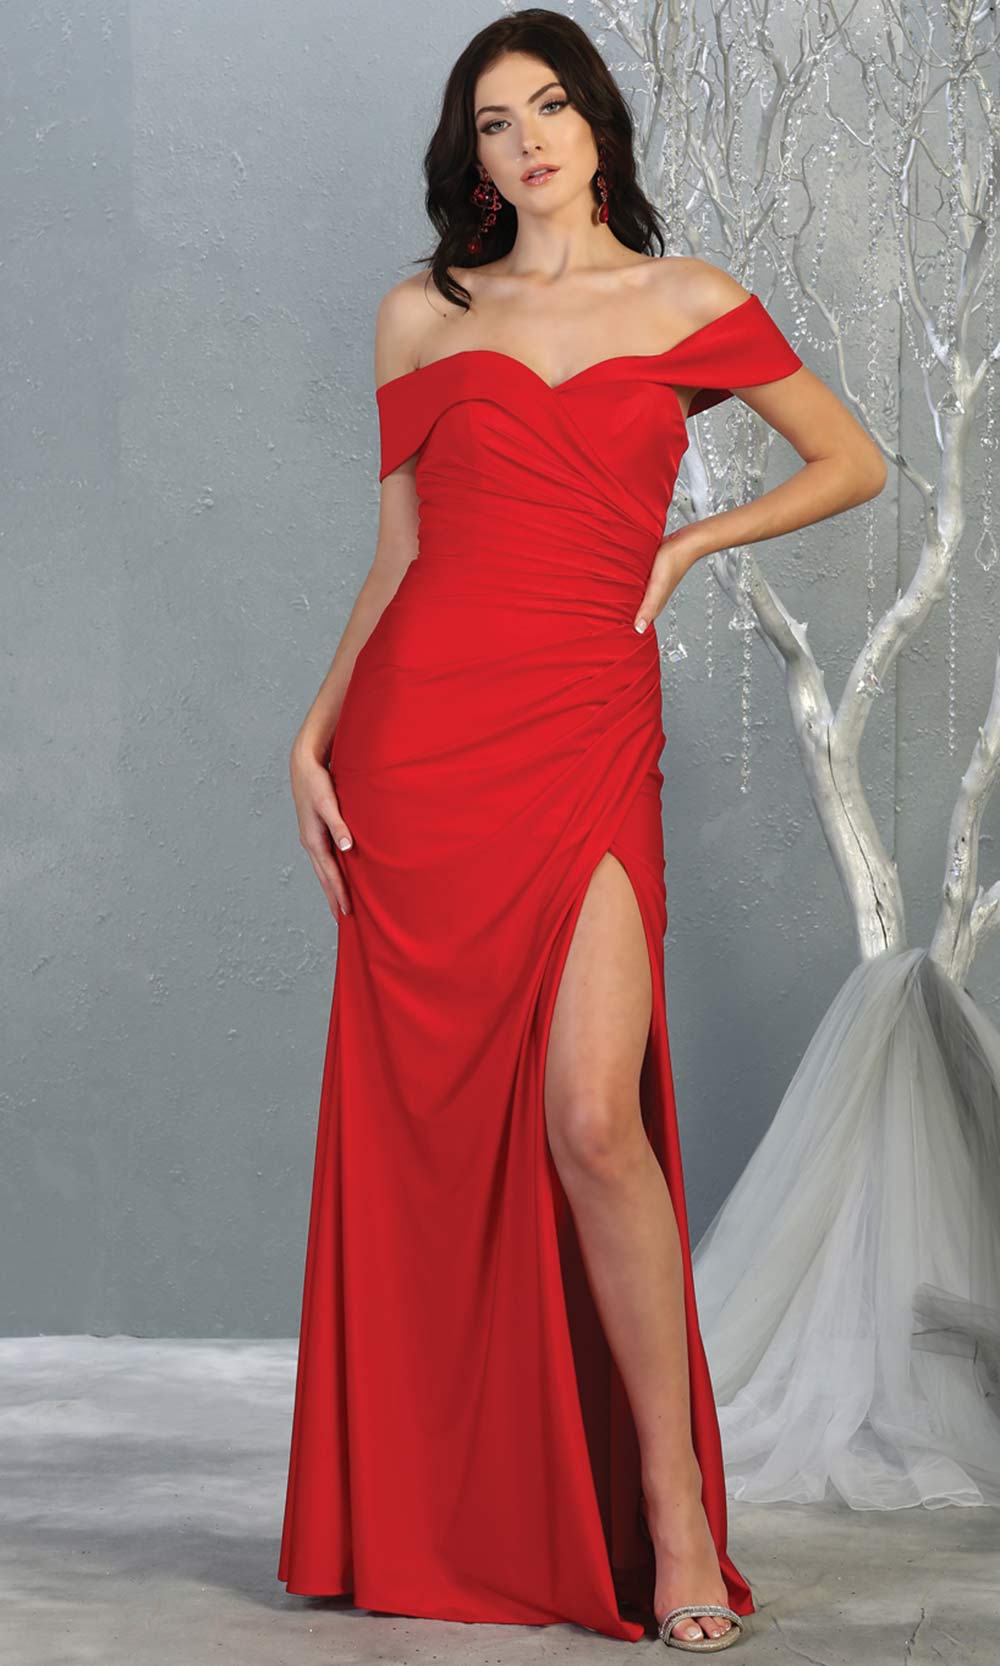 Mayqueen MQ1825 long red off shoulder fitted bridesmaid dress w/high slit. Full length red sleek & sexy gown is perfect for enagagement/e-shoot dress, formal wedding guest, indowestern gown, evening party dress, prom, bridesmaid. Plus sizes avail.jpg